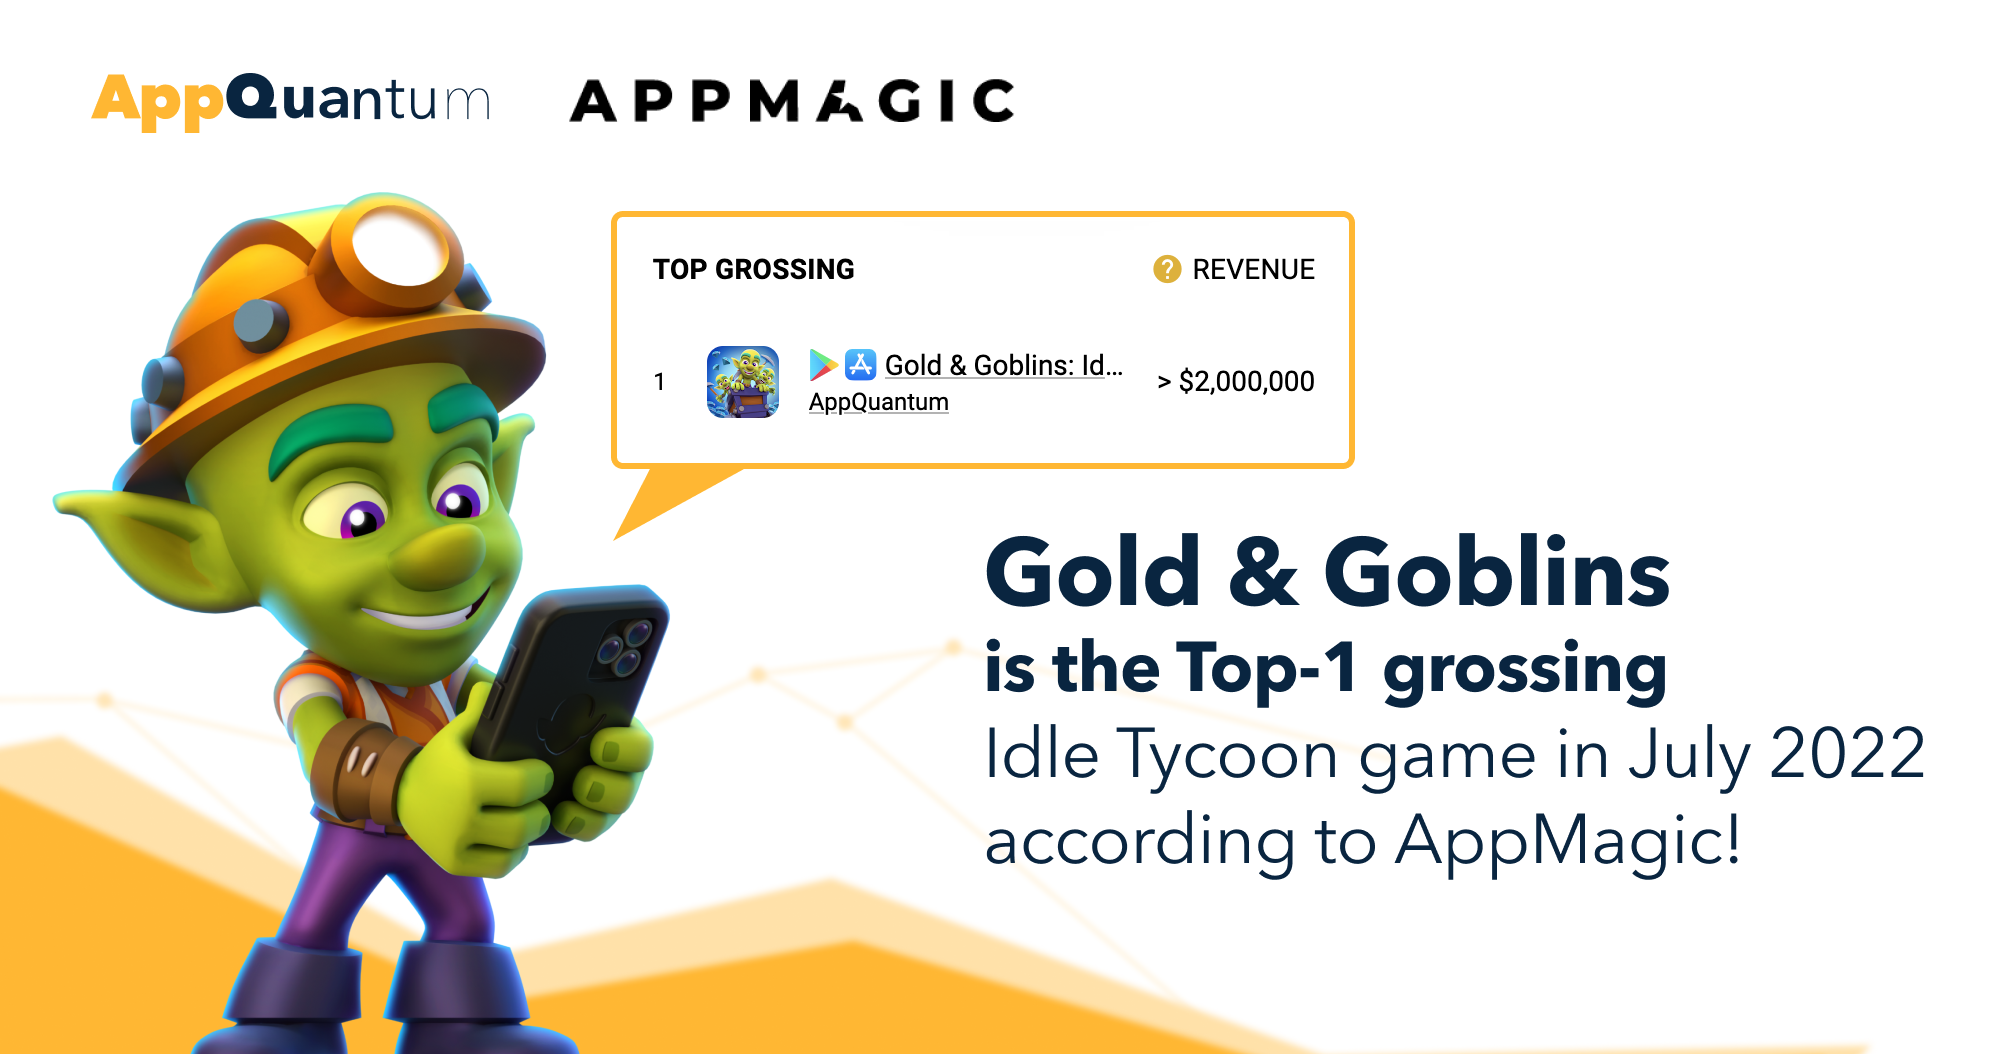 Gold & Goblins is the Top-1 Grossing Idle Tycoon Game in July 2022